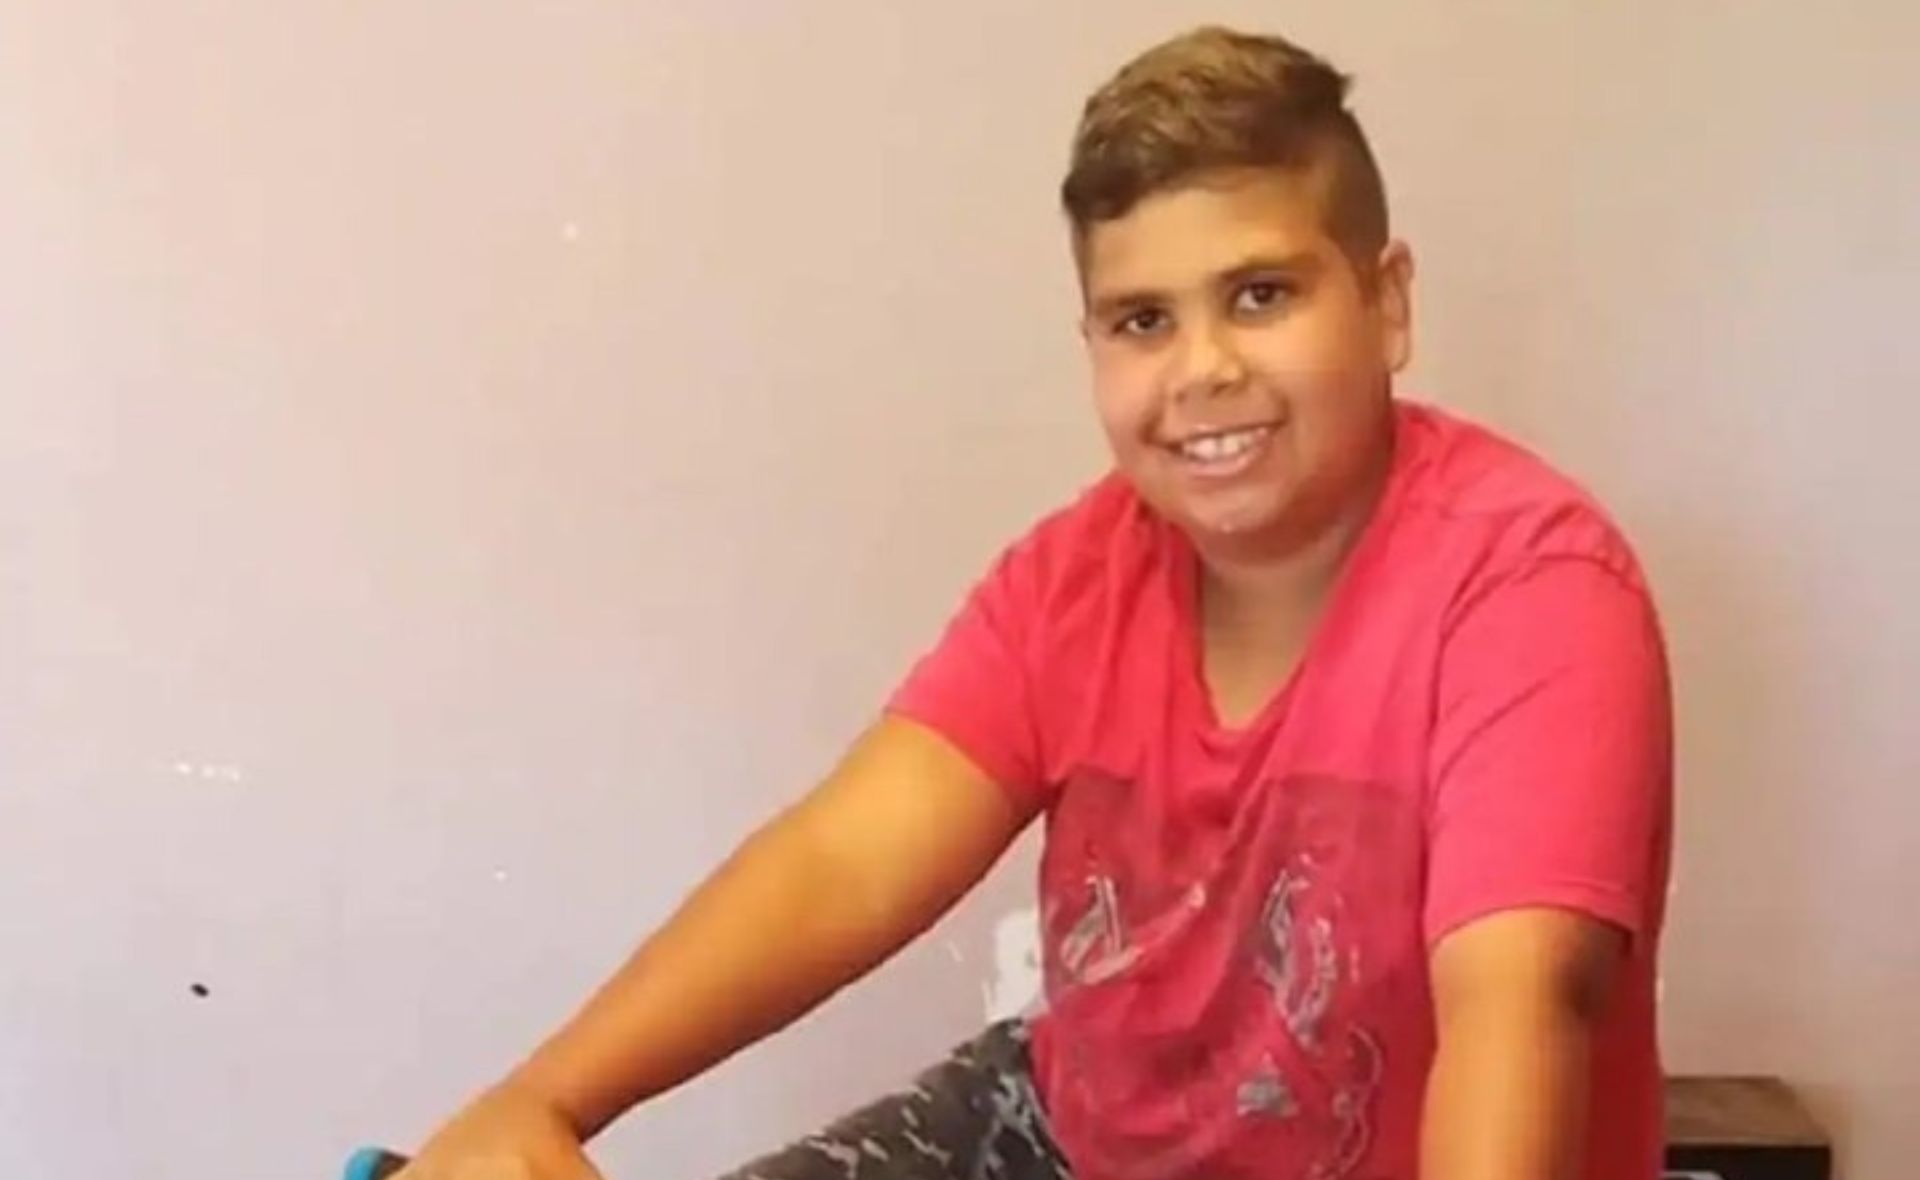 Noongar teen Cassius Turvey’s National Day of Action: All the dates you need to know